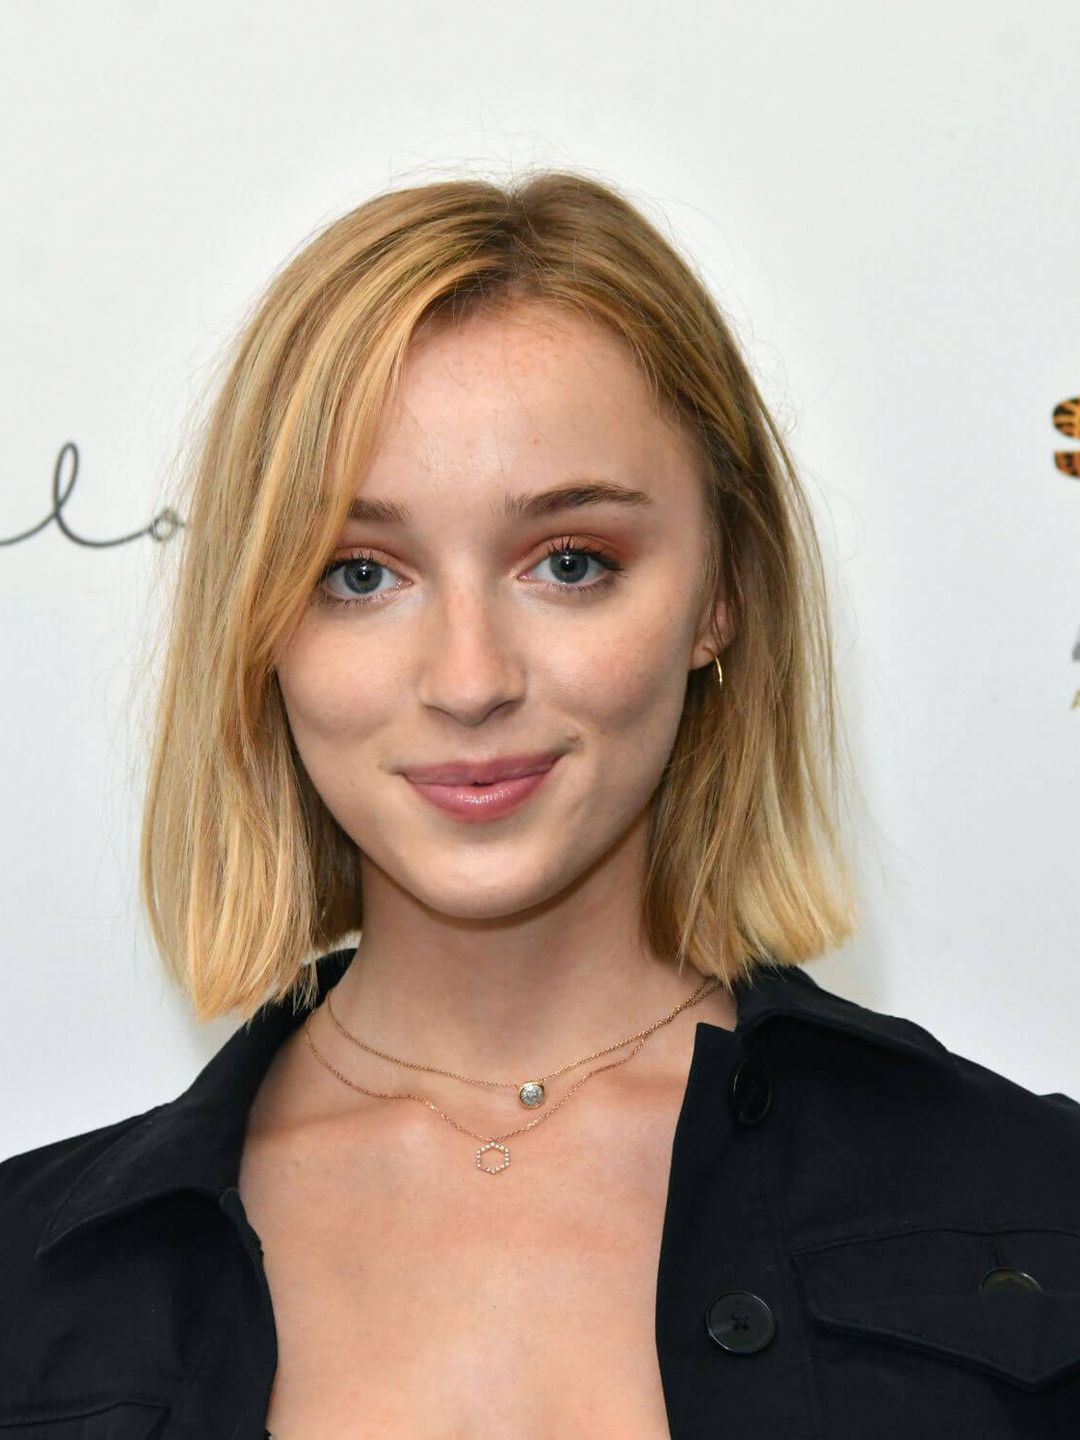 Phoebe Dynevor who is her father